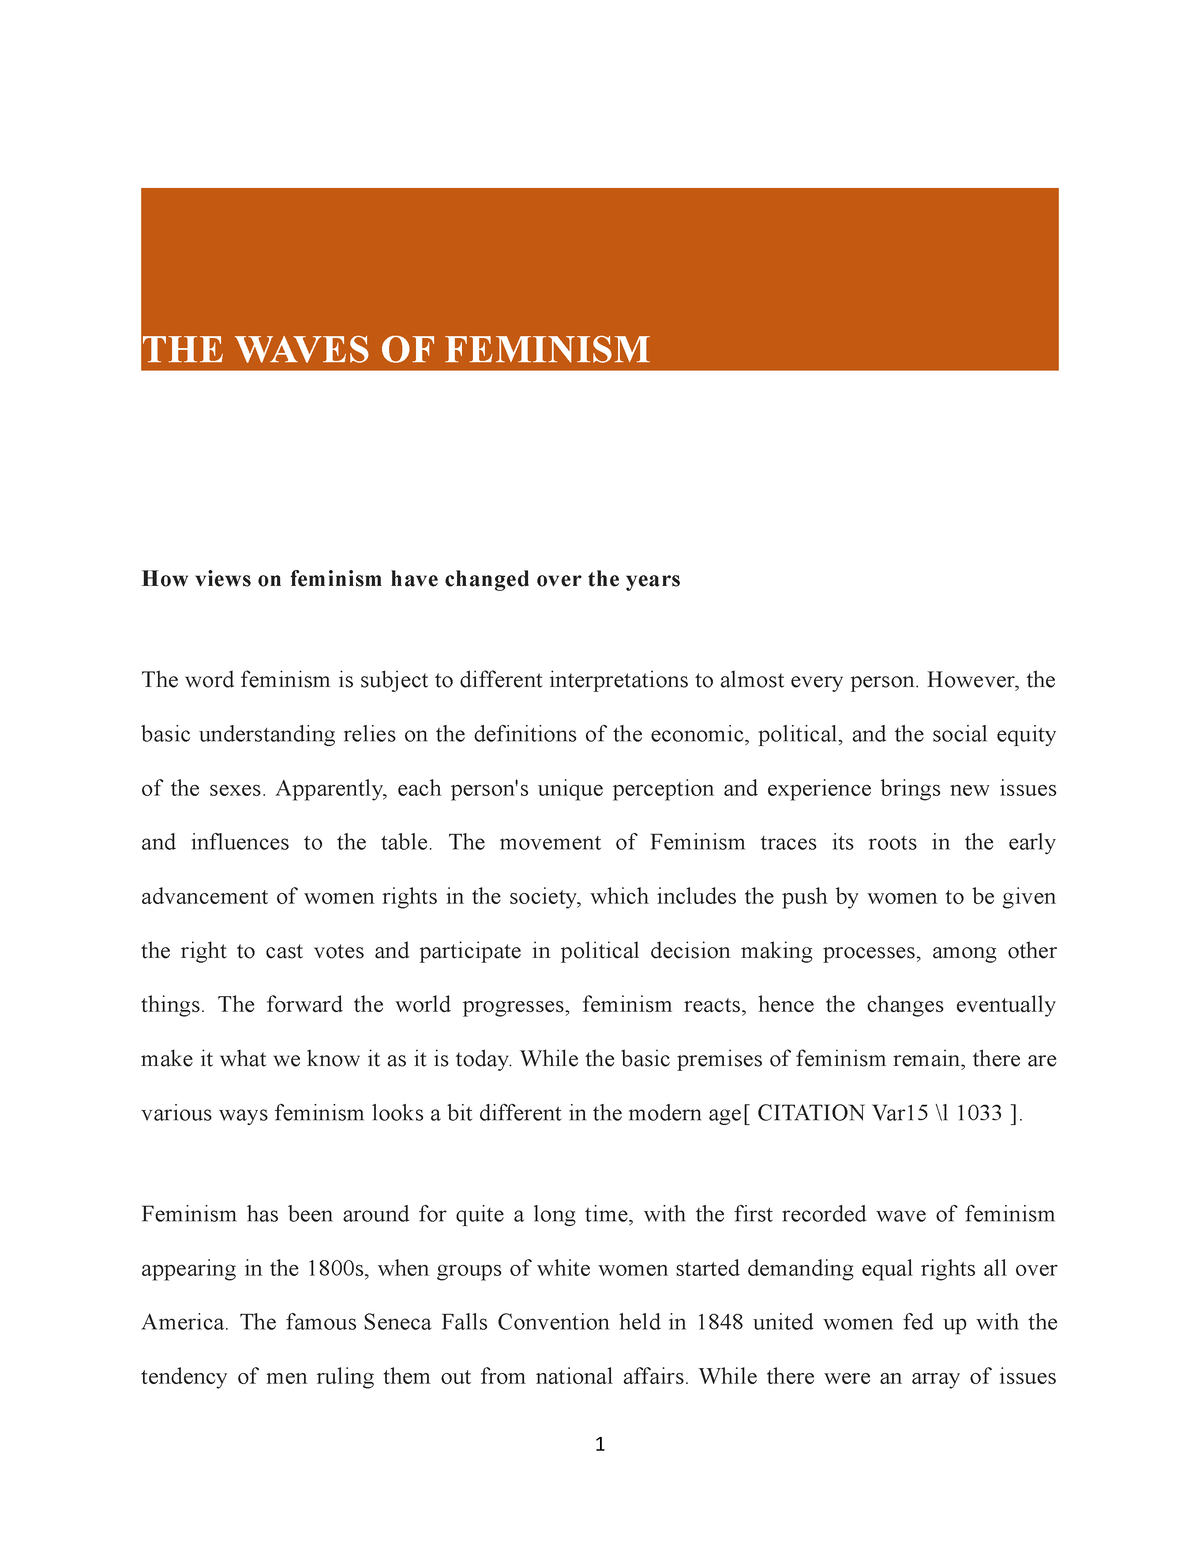 essay on new waves of feminism and our culture